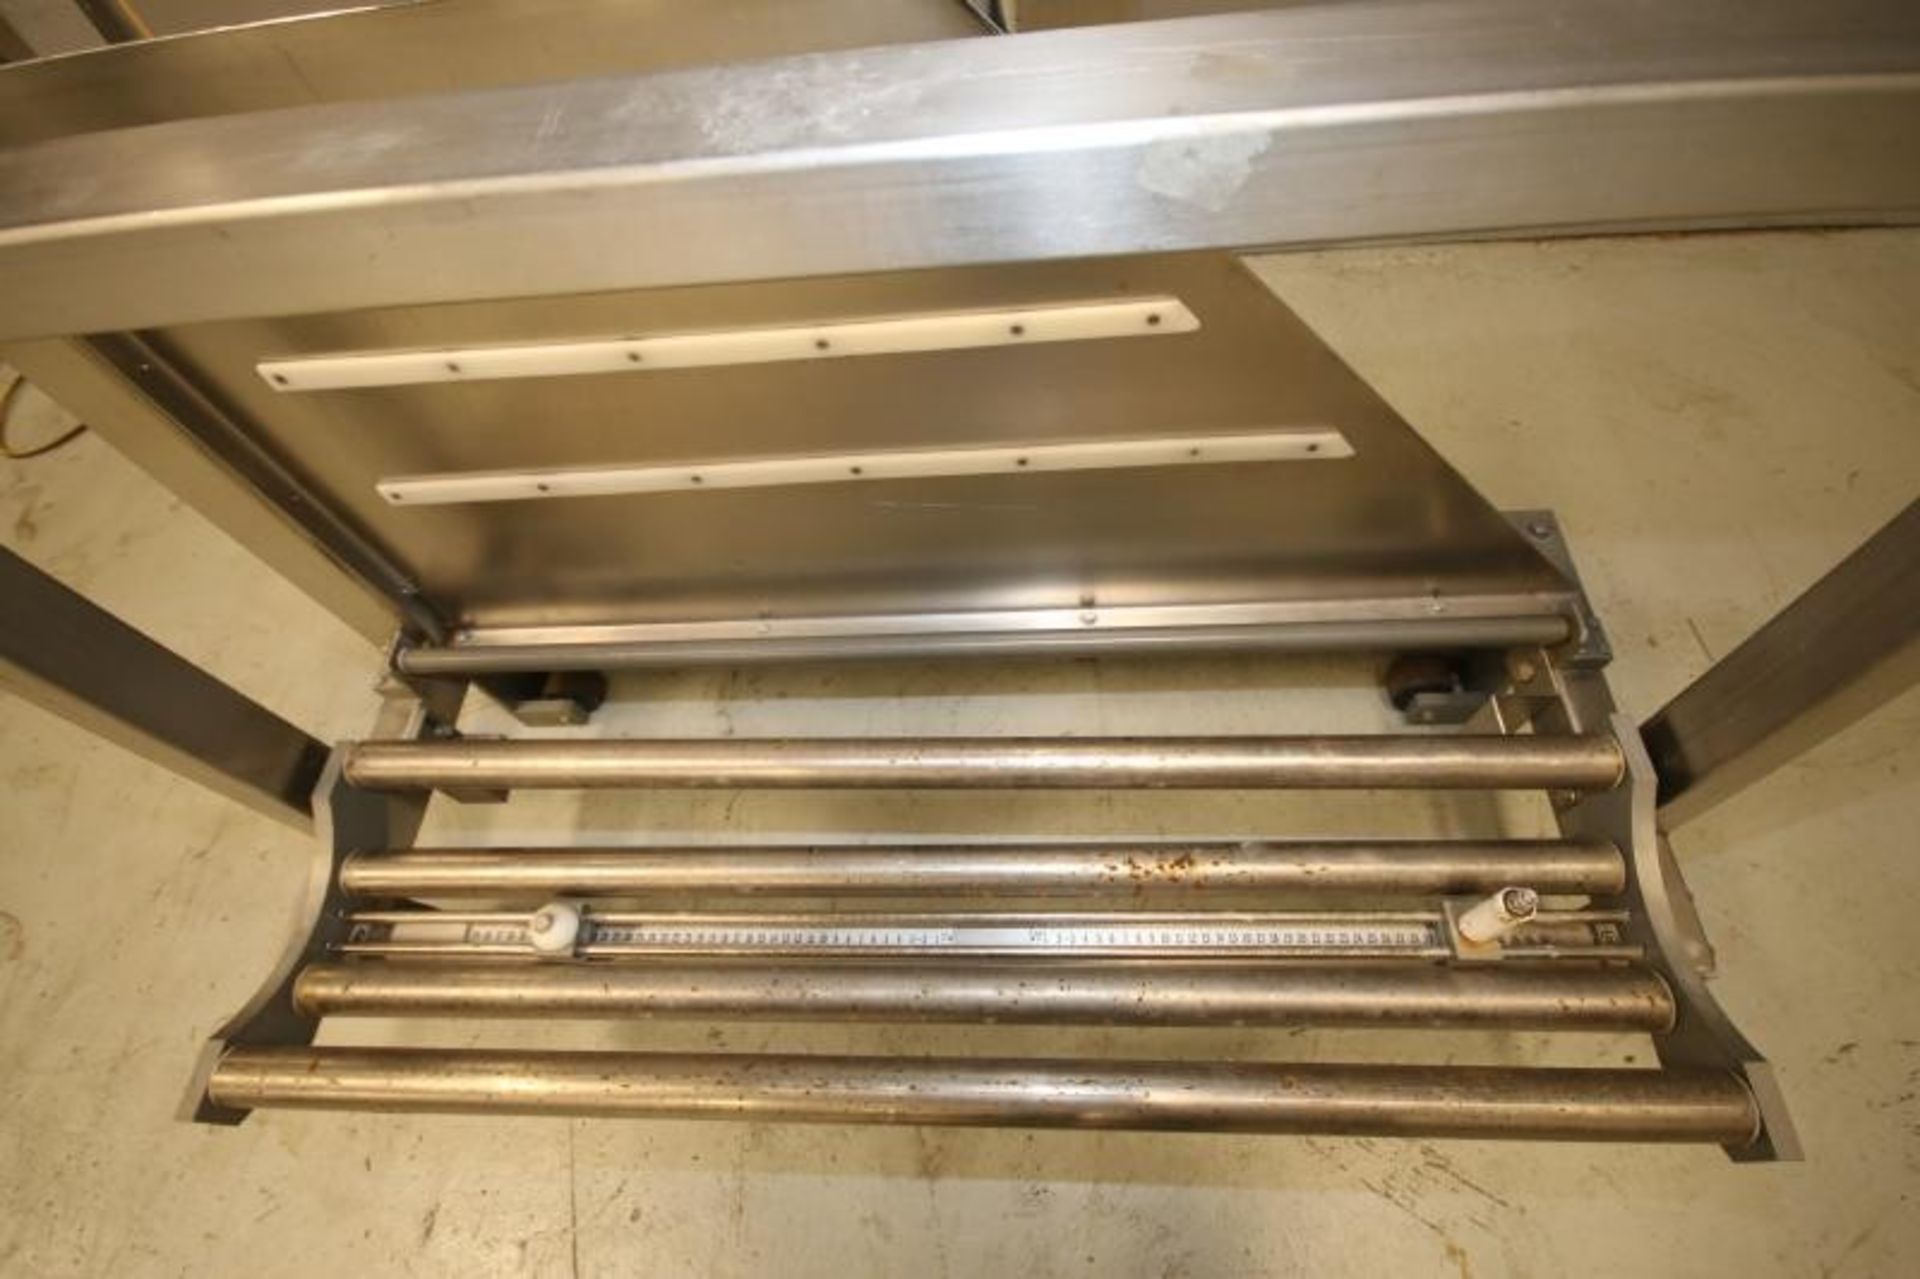 S/S Rack with Rollers, 55" L x 27" W x 41" H,Mounted on Wheels (INV#81408)(Located @ the MDG Auction - Image 3 of 3